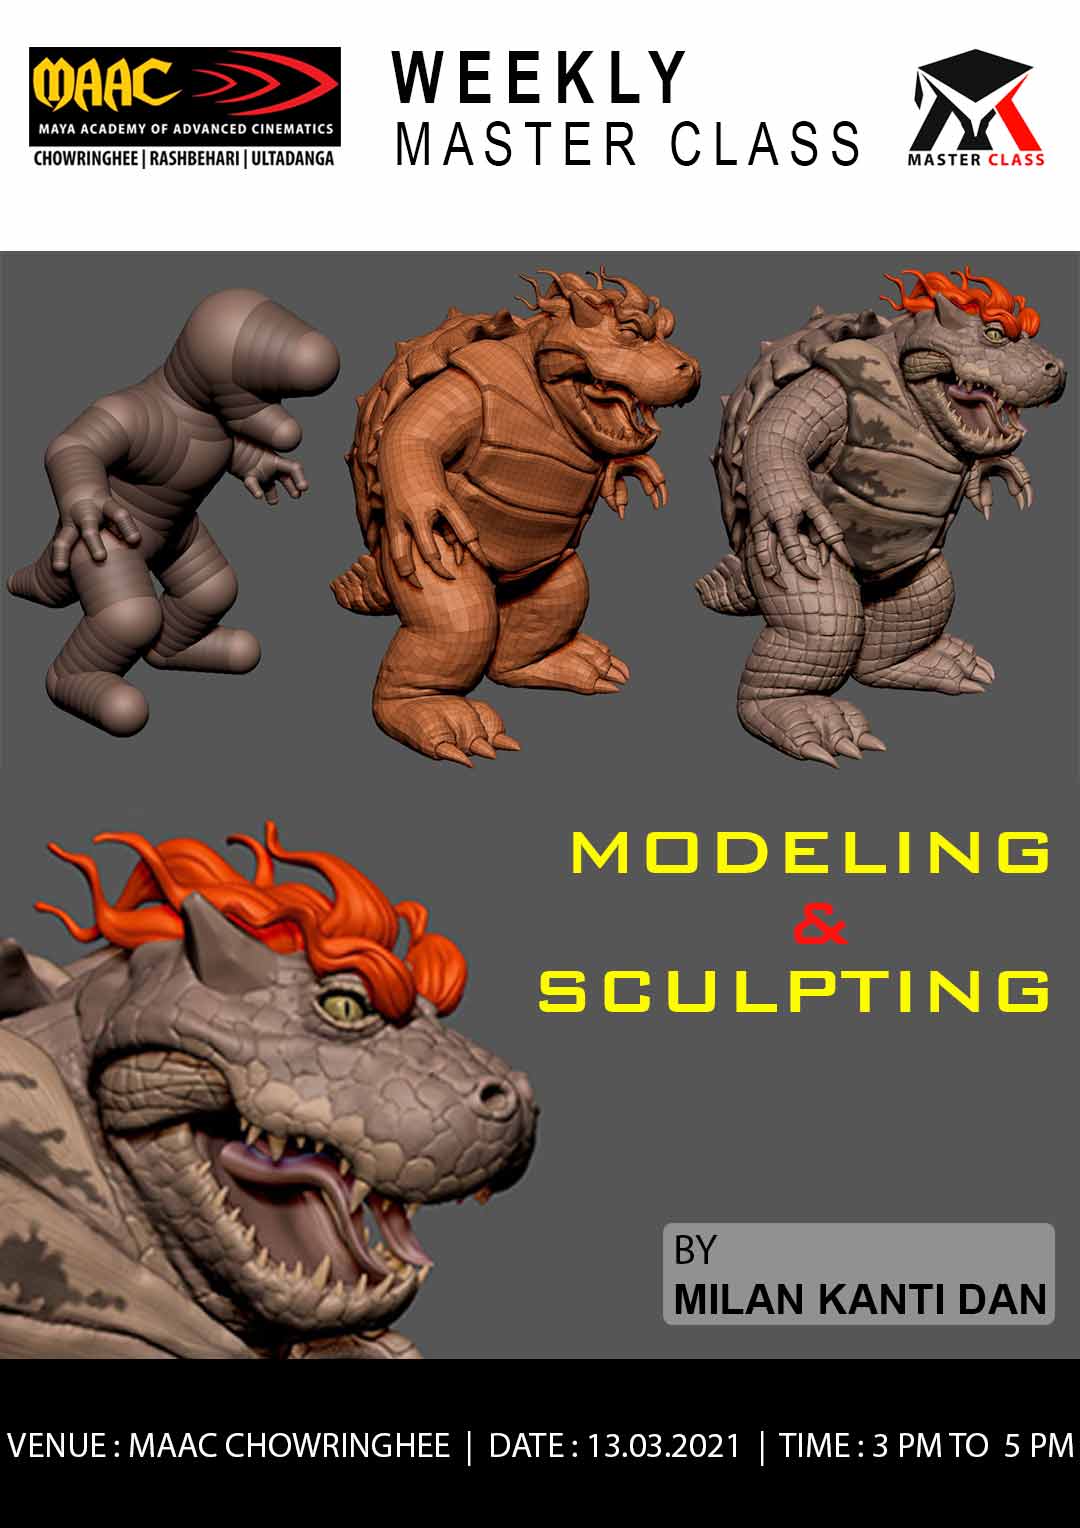 Weekly Master Class on Modeling & Sculpting